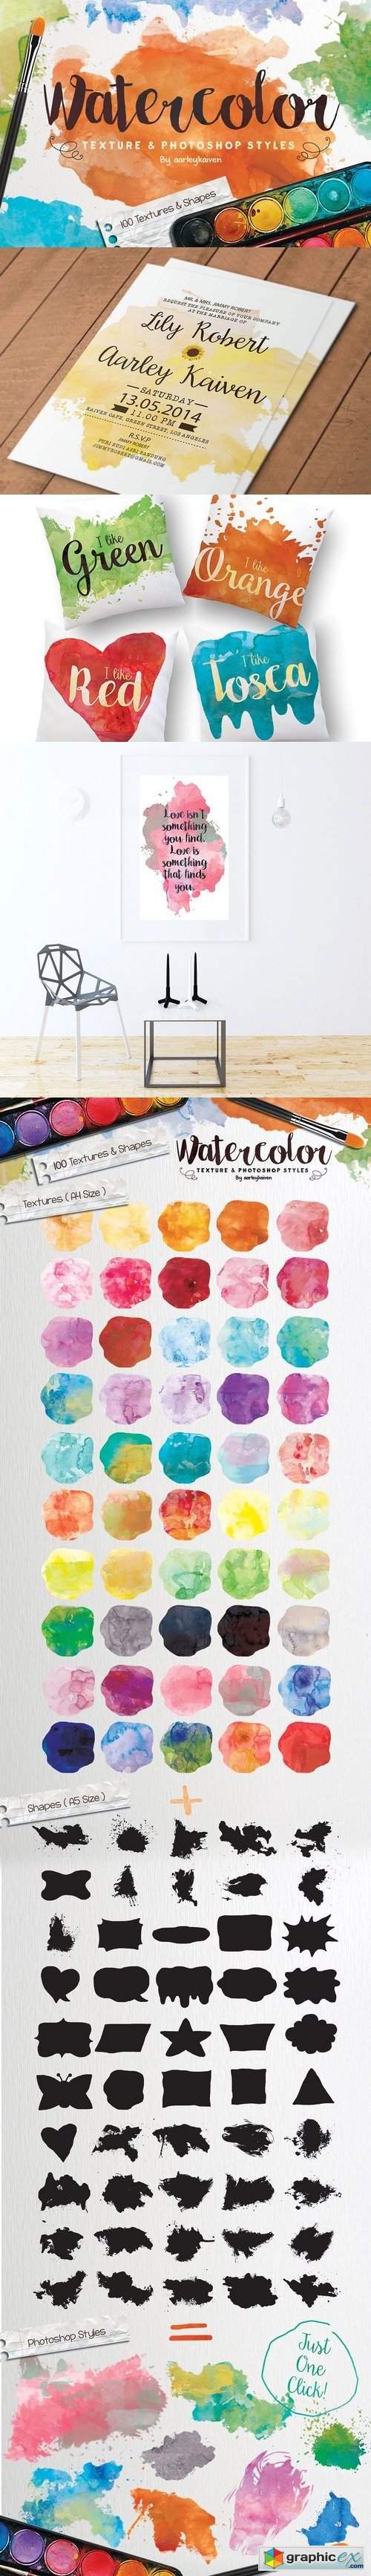 Watercolor Texture & Styles